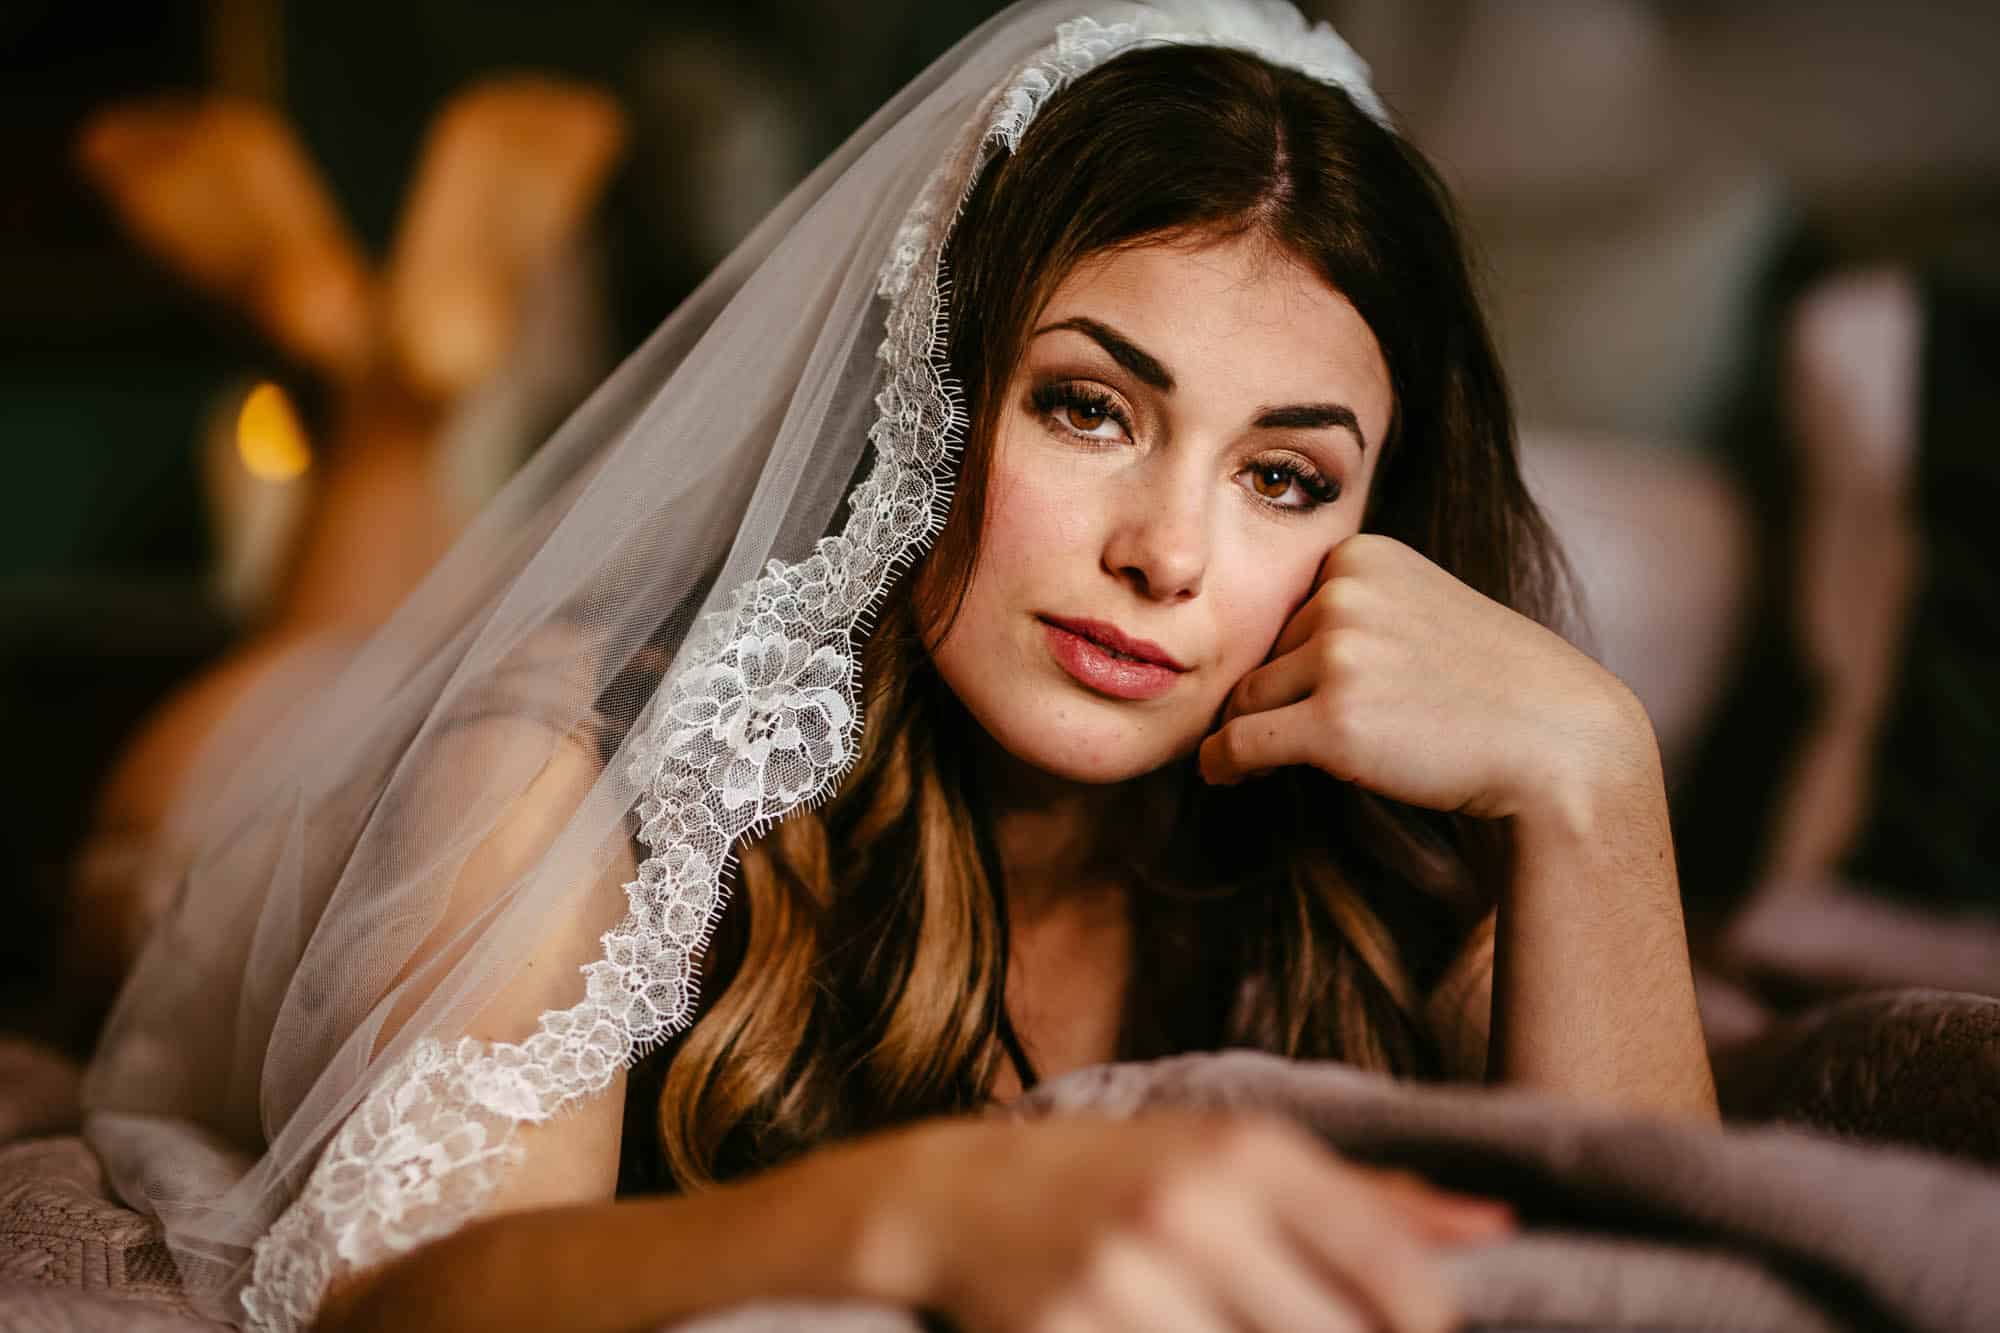 A beautiful woman lying on a bed, dressed in bridal lingerie and a veil.